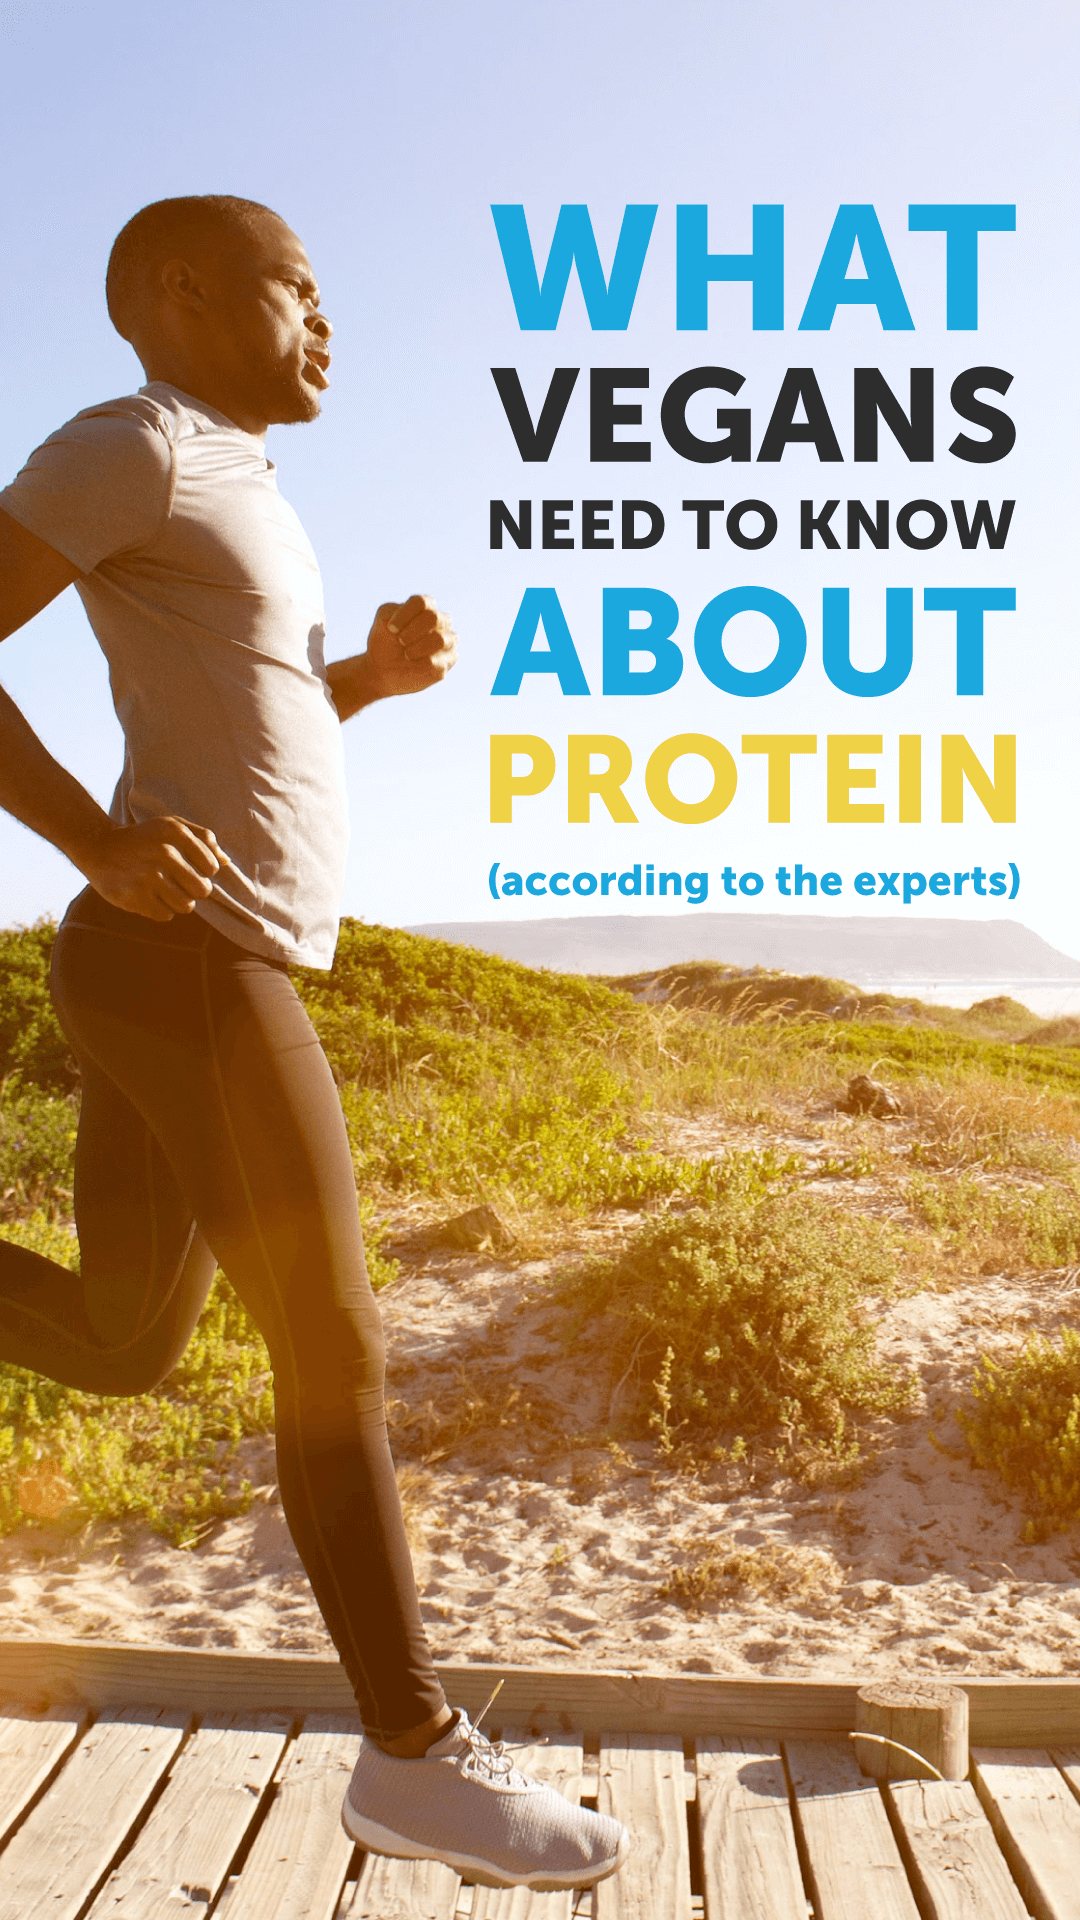 What Vegans Need to Know About Protein, According to the Experts